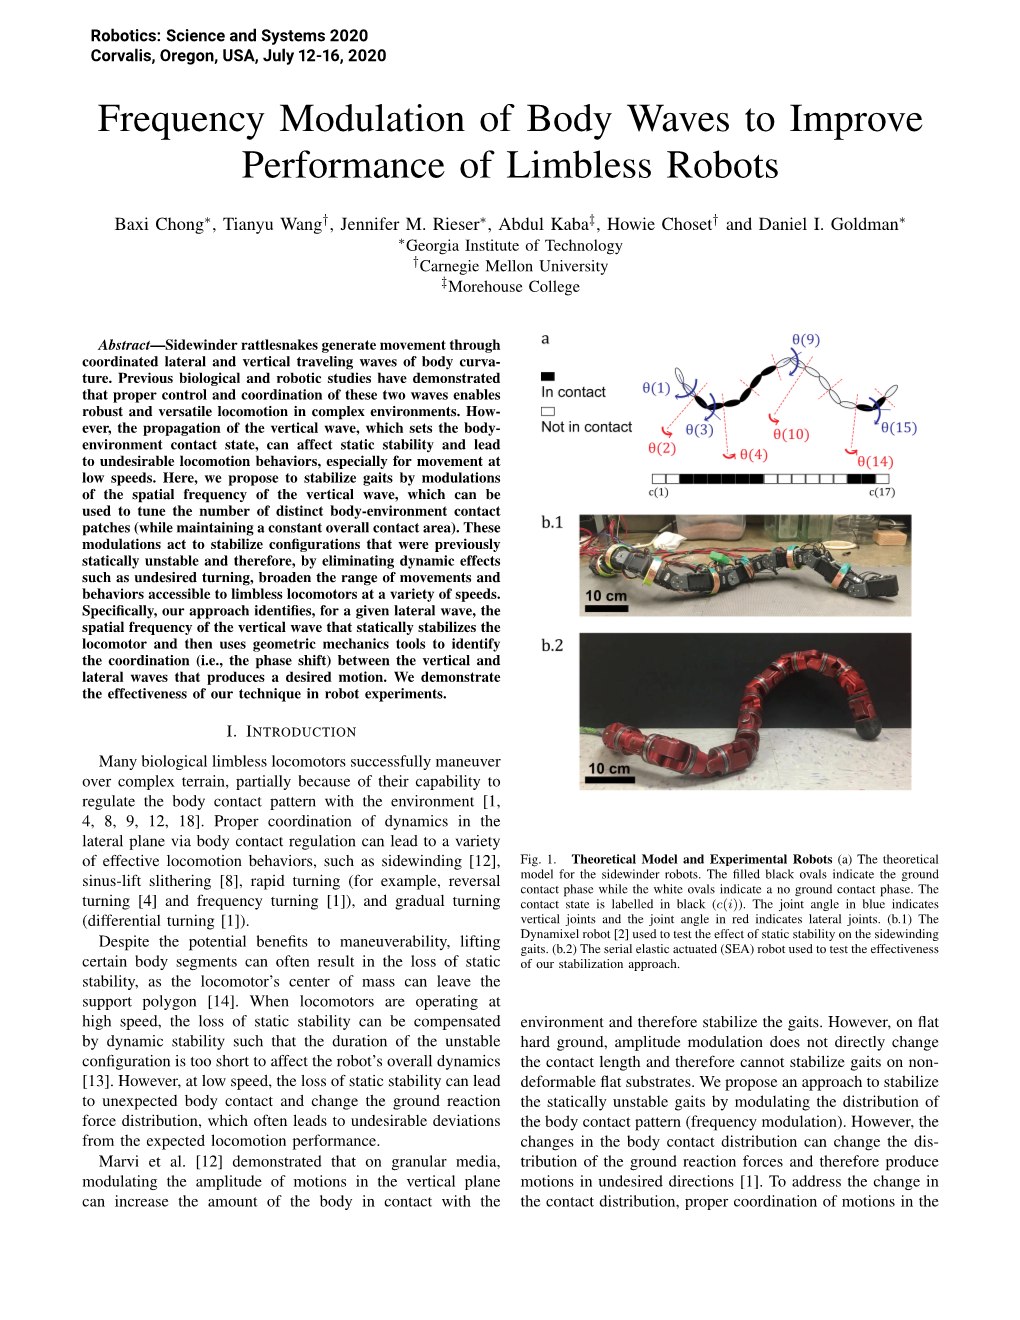 Frequency Modulation of Body Waves to Improve Performance of Limbless Robots